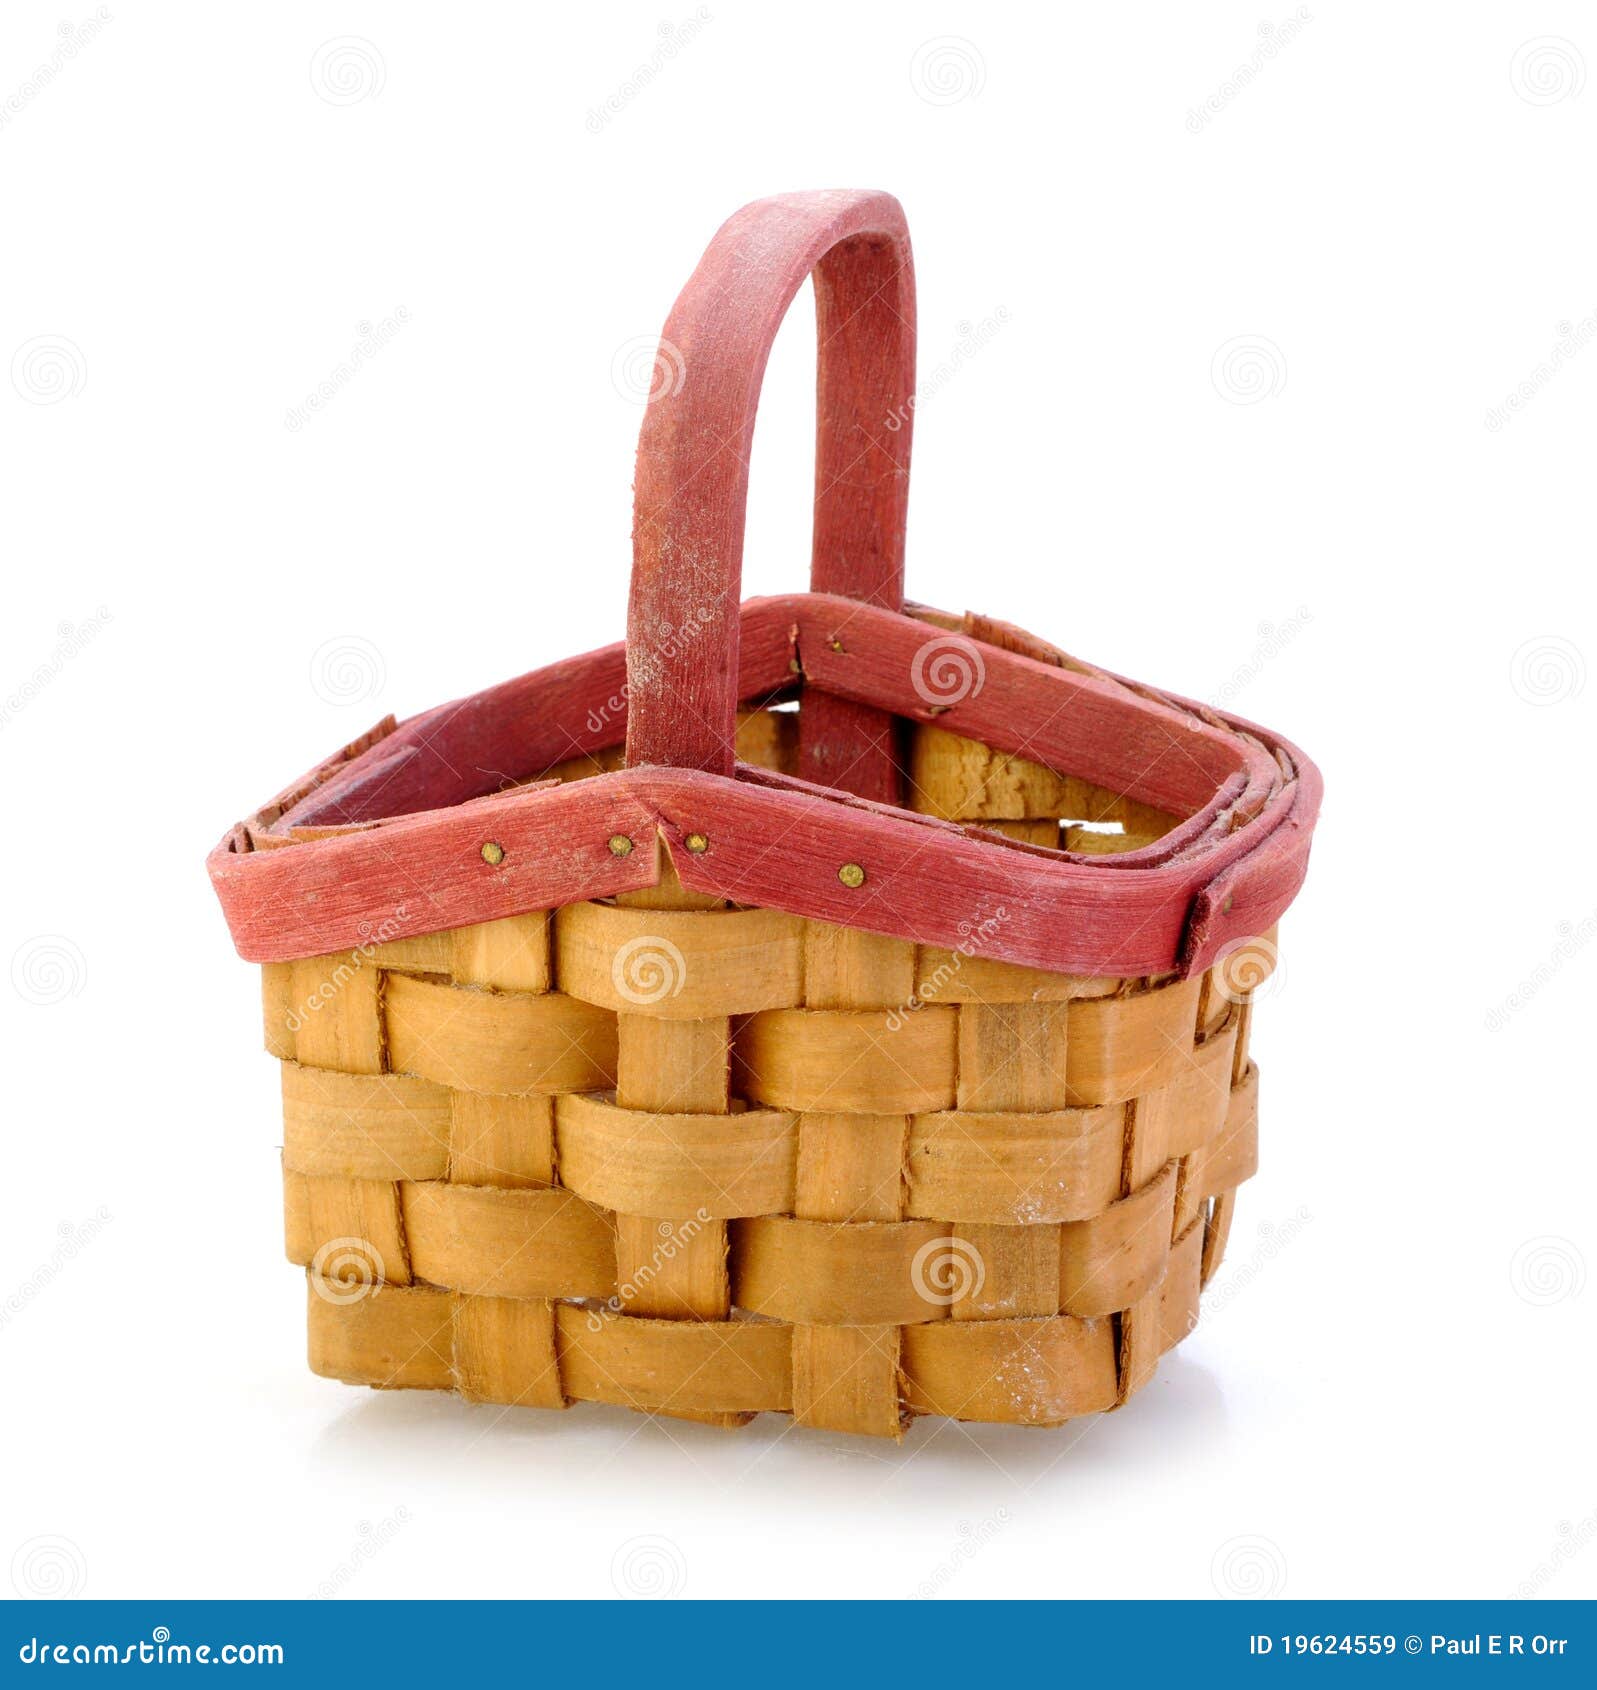 Small wooden basket stock image. Image of pattern, background - 19624559